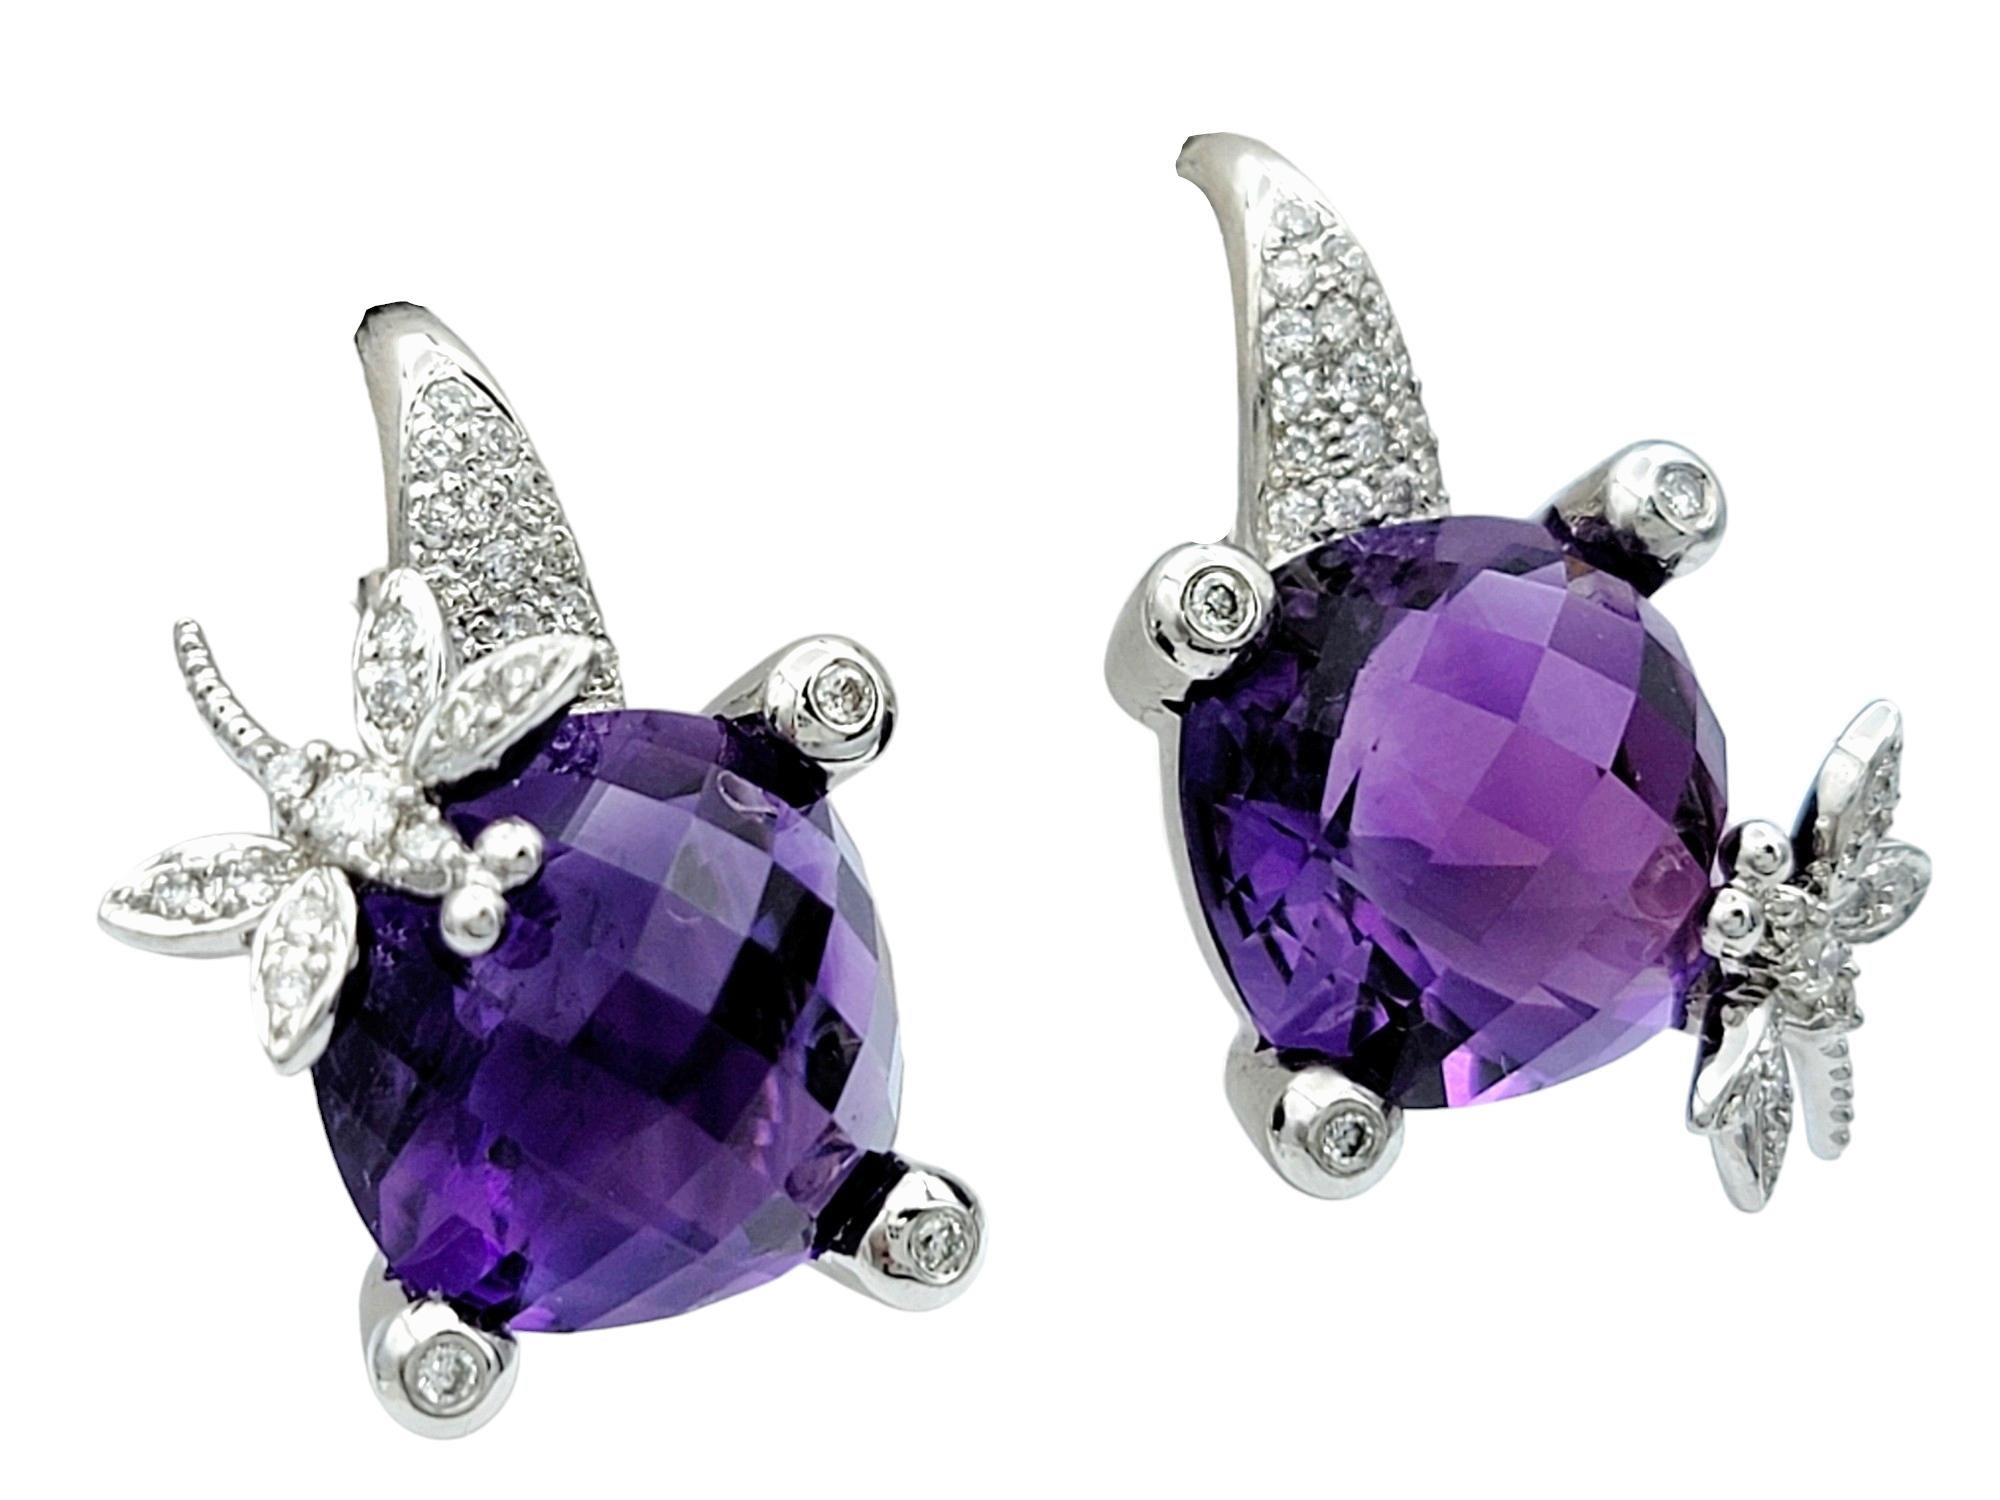 These enchanting cushion checkerboard amethyst earrings, set in lustrous 18 karat white gold are a true work of art. The vibrant purple hues of the cushion-cut amethyst gemstones add a pop of color and sophistication to any look, while their cushion